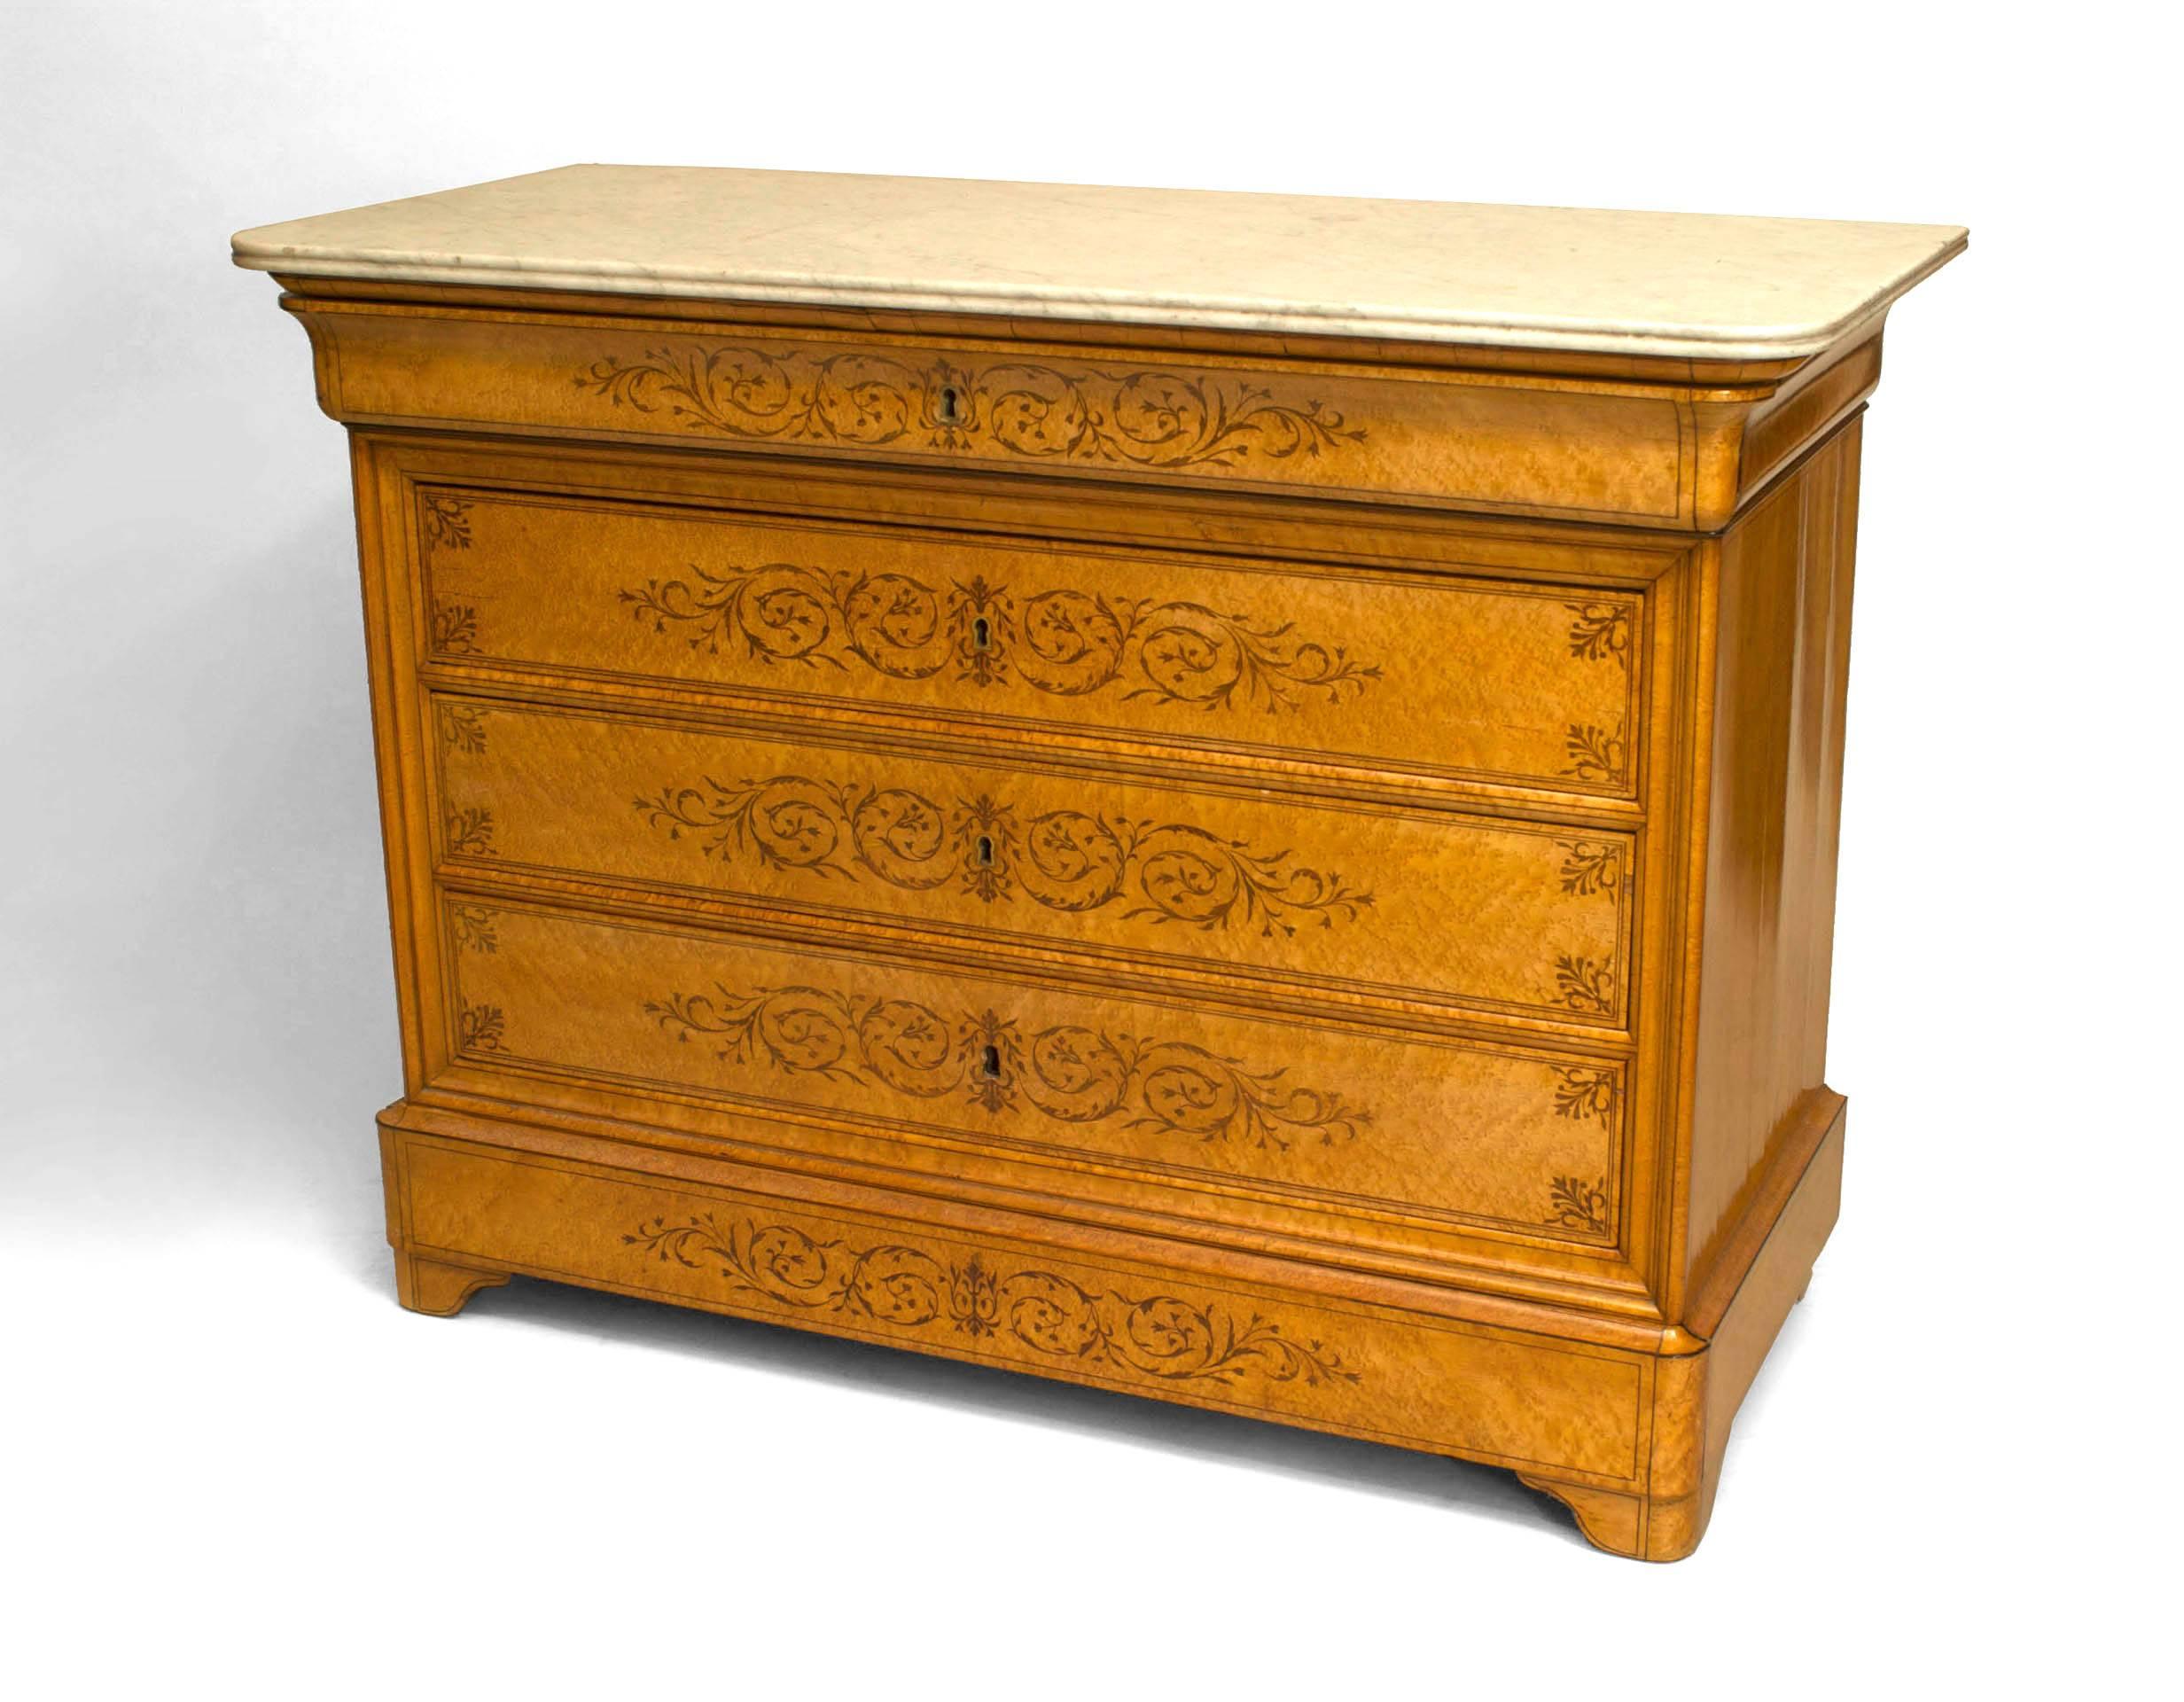 French Charles X bird's eye maple chest with 5 amaranth marquetry inlaid drawers and supporting a white marble top.
